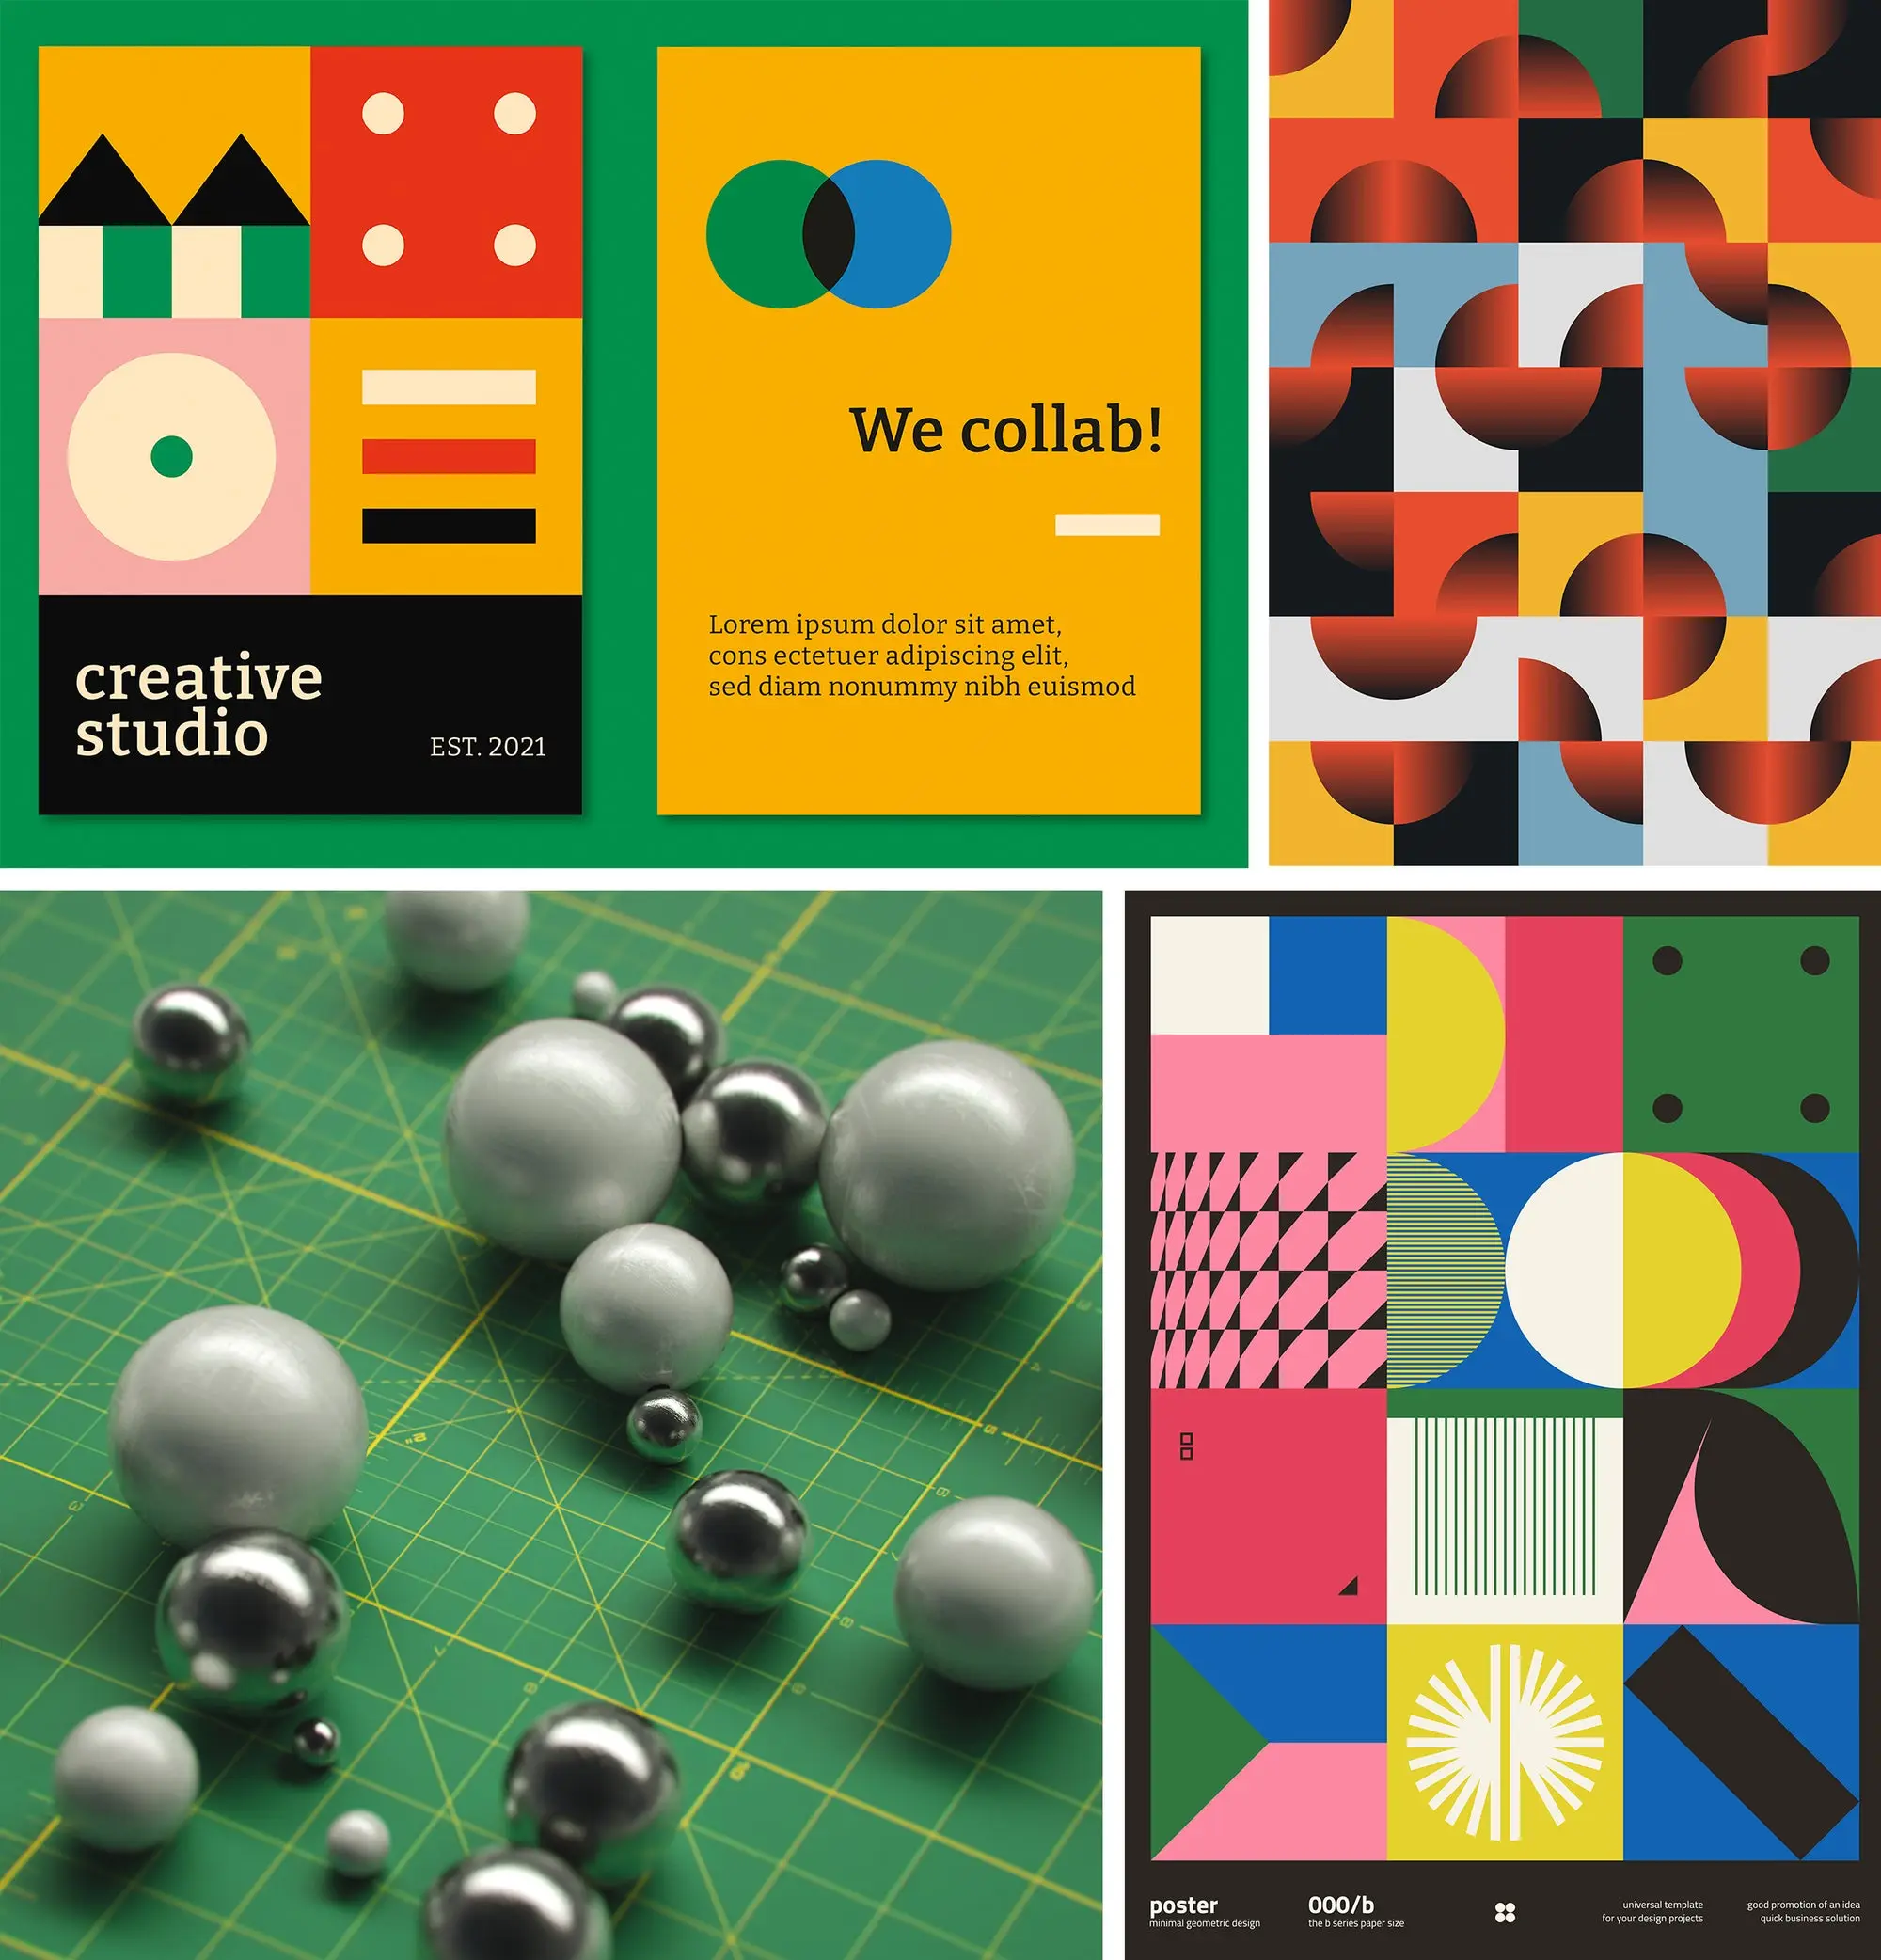 A collage of 4 art pieces created with Bauhaus-influence.